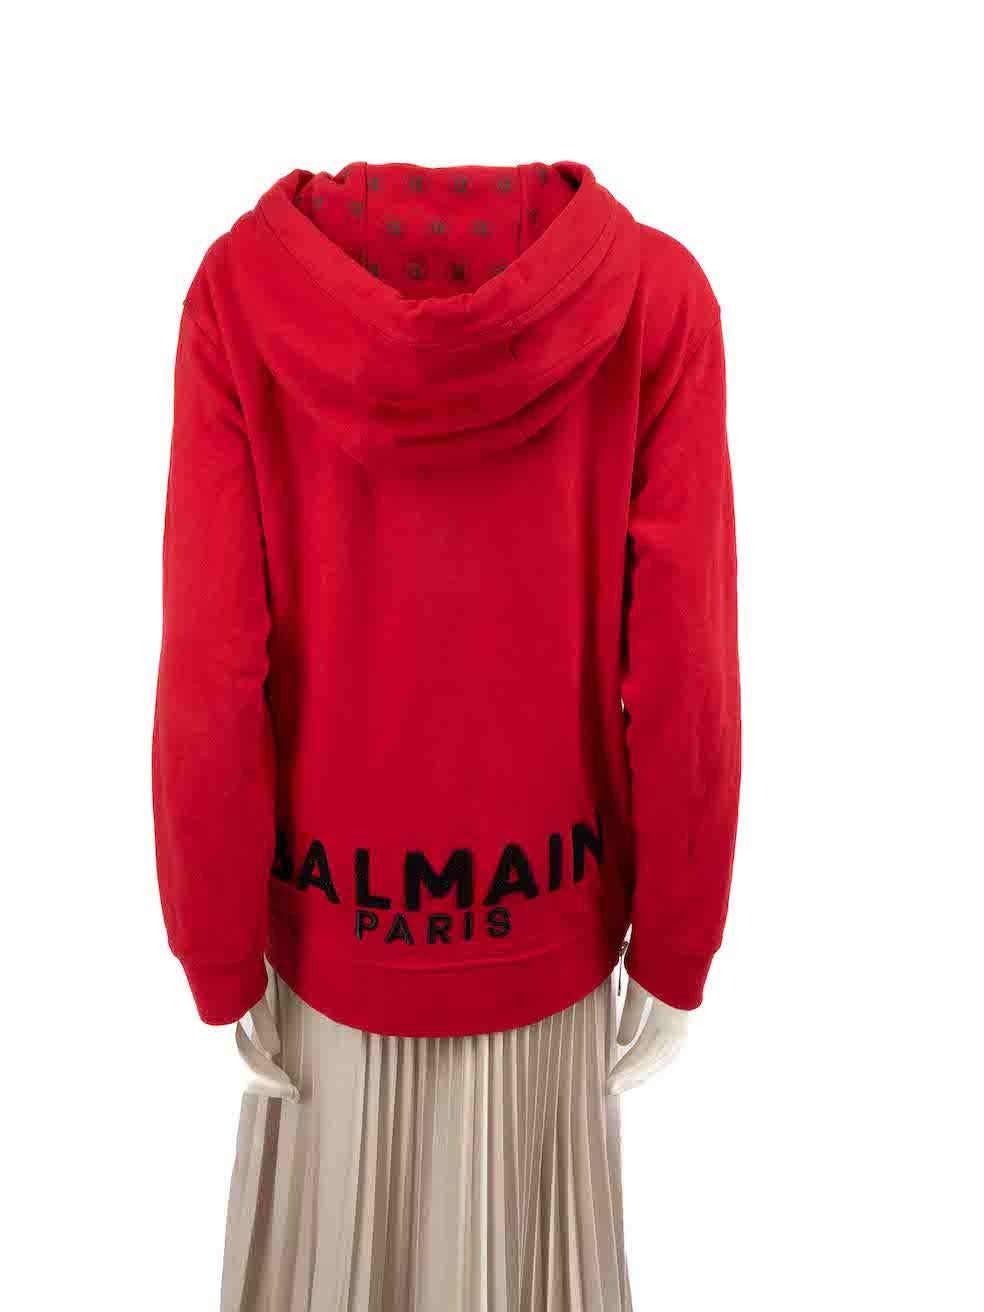 Balmain Red Logo Embroidered Zip Detail Hoodie Size L In Excellent Condition For Sale In London, GB